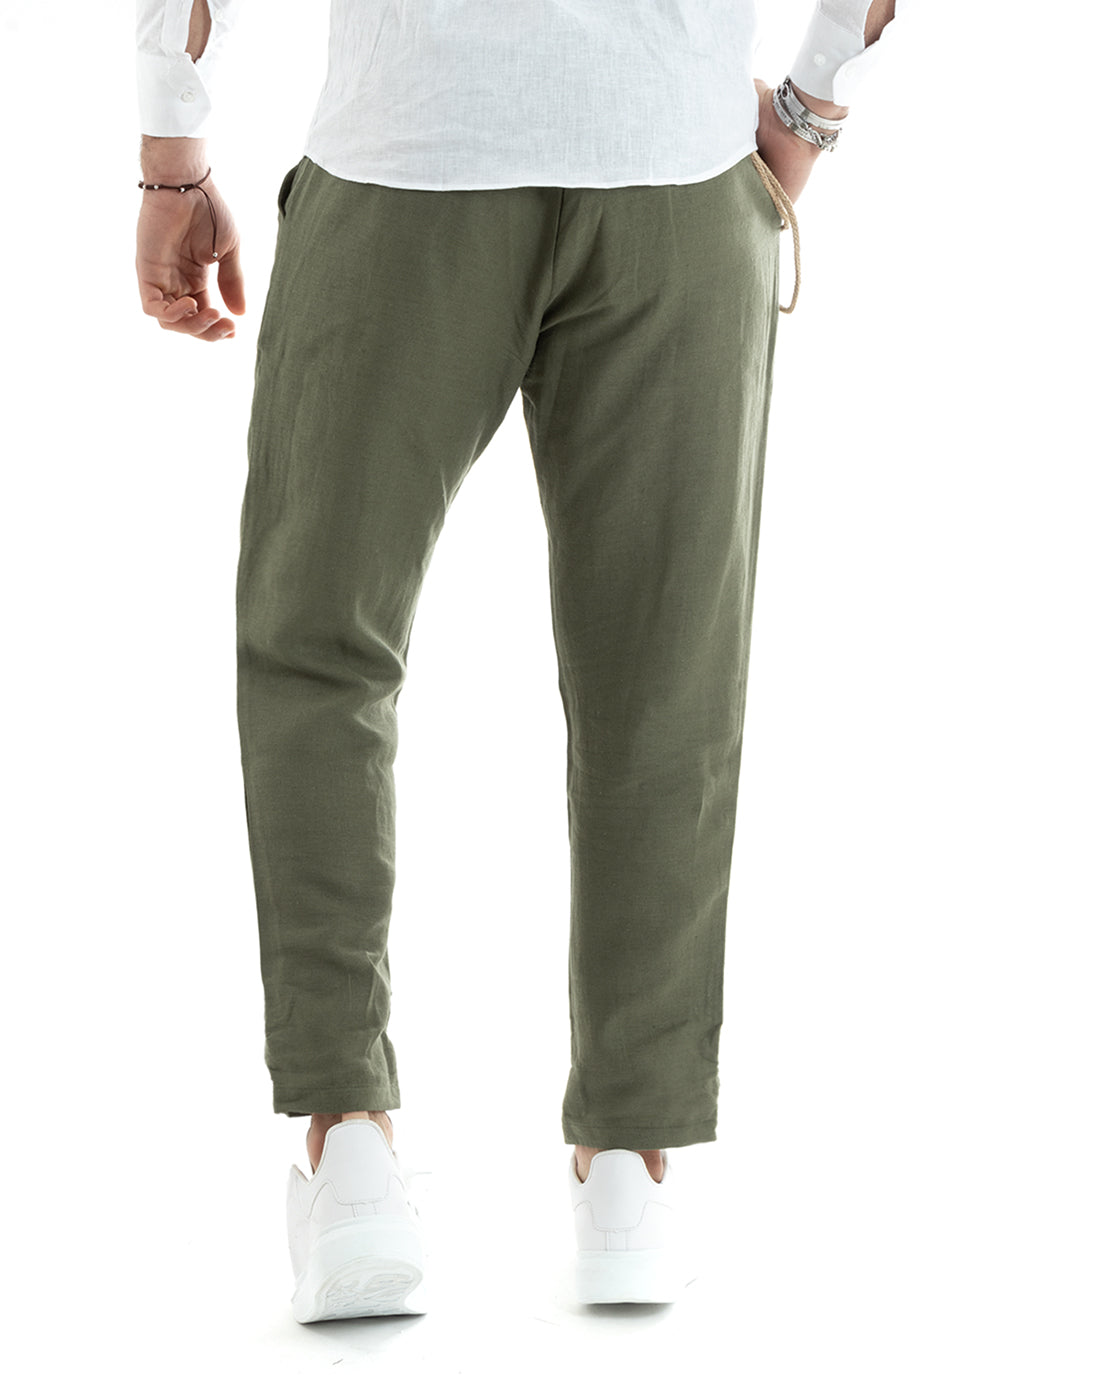 Long Men's Trousers Solid Color Green Linen Button Casual Classic GIOSAL-P5789A